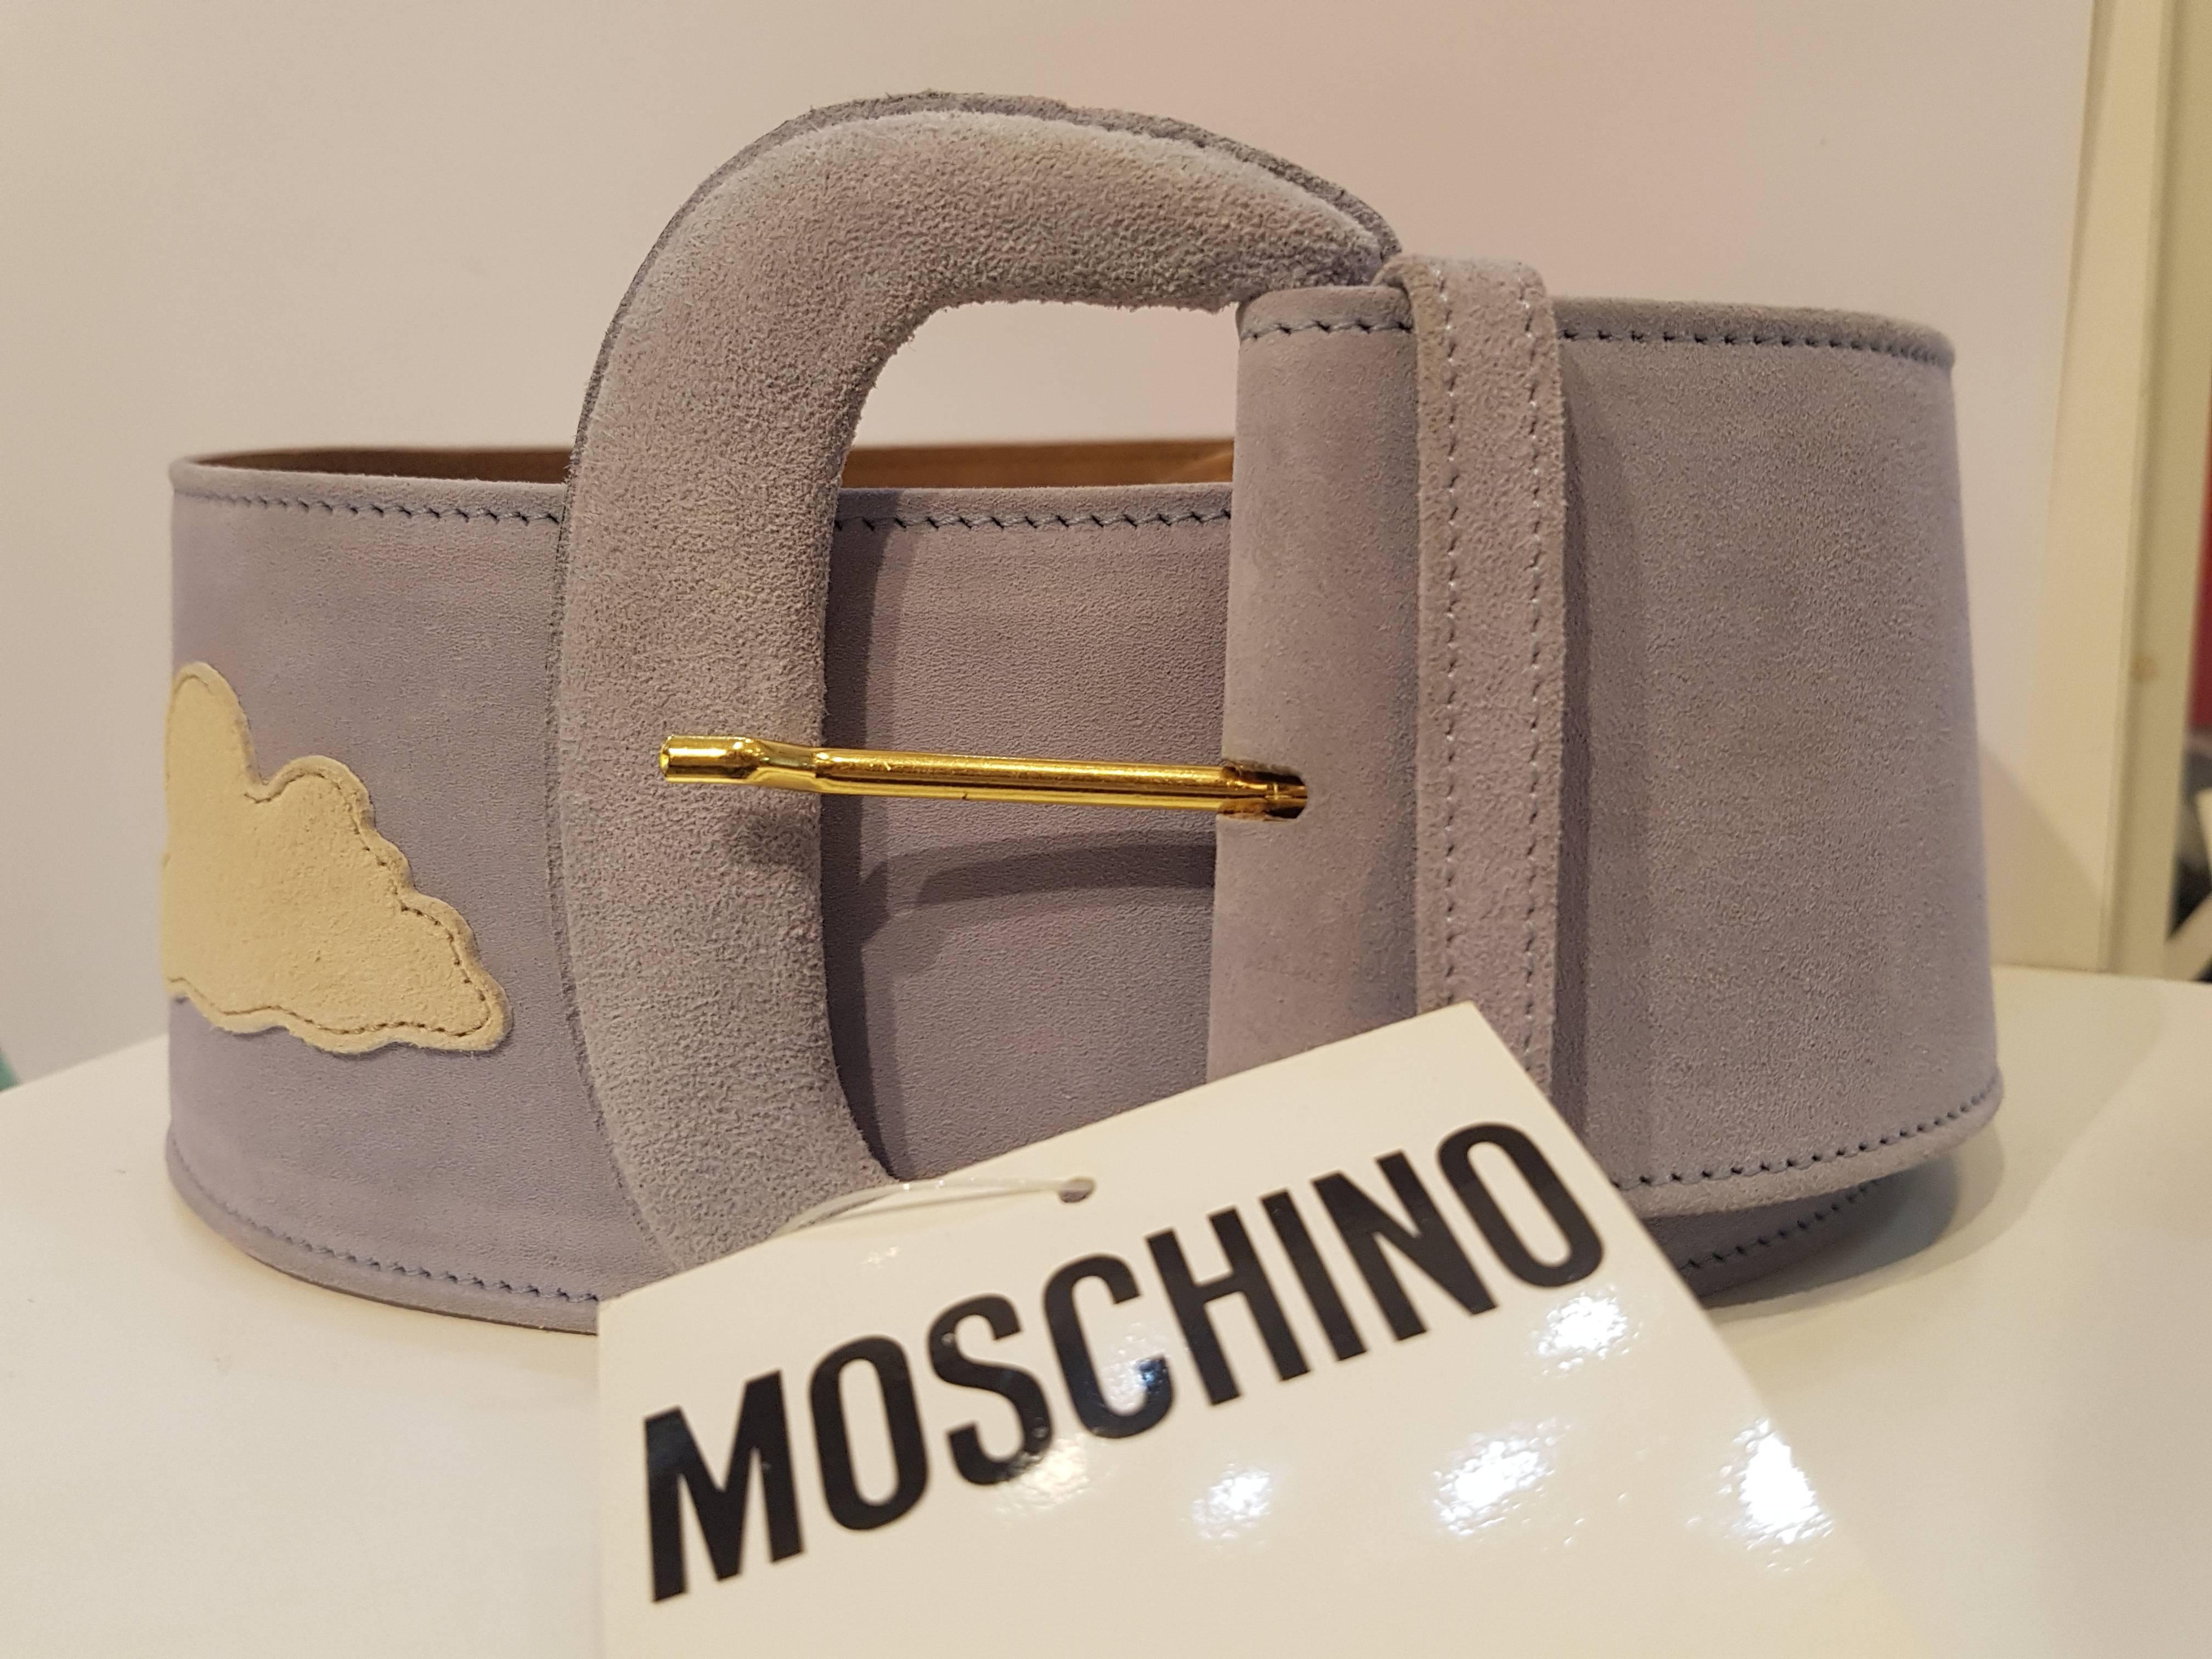 Moschino light blu white clouds NWOT belt
Totally made in italy
still with tags
unworn
Size: 40
